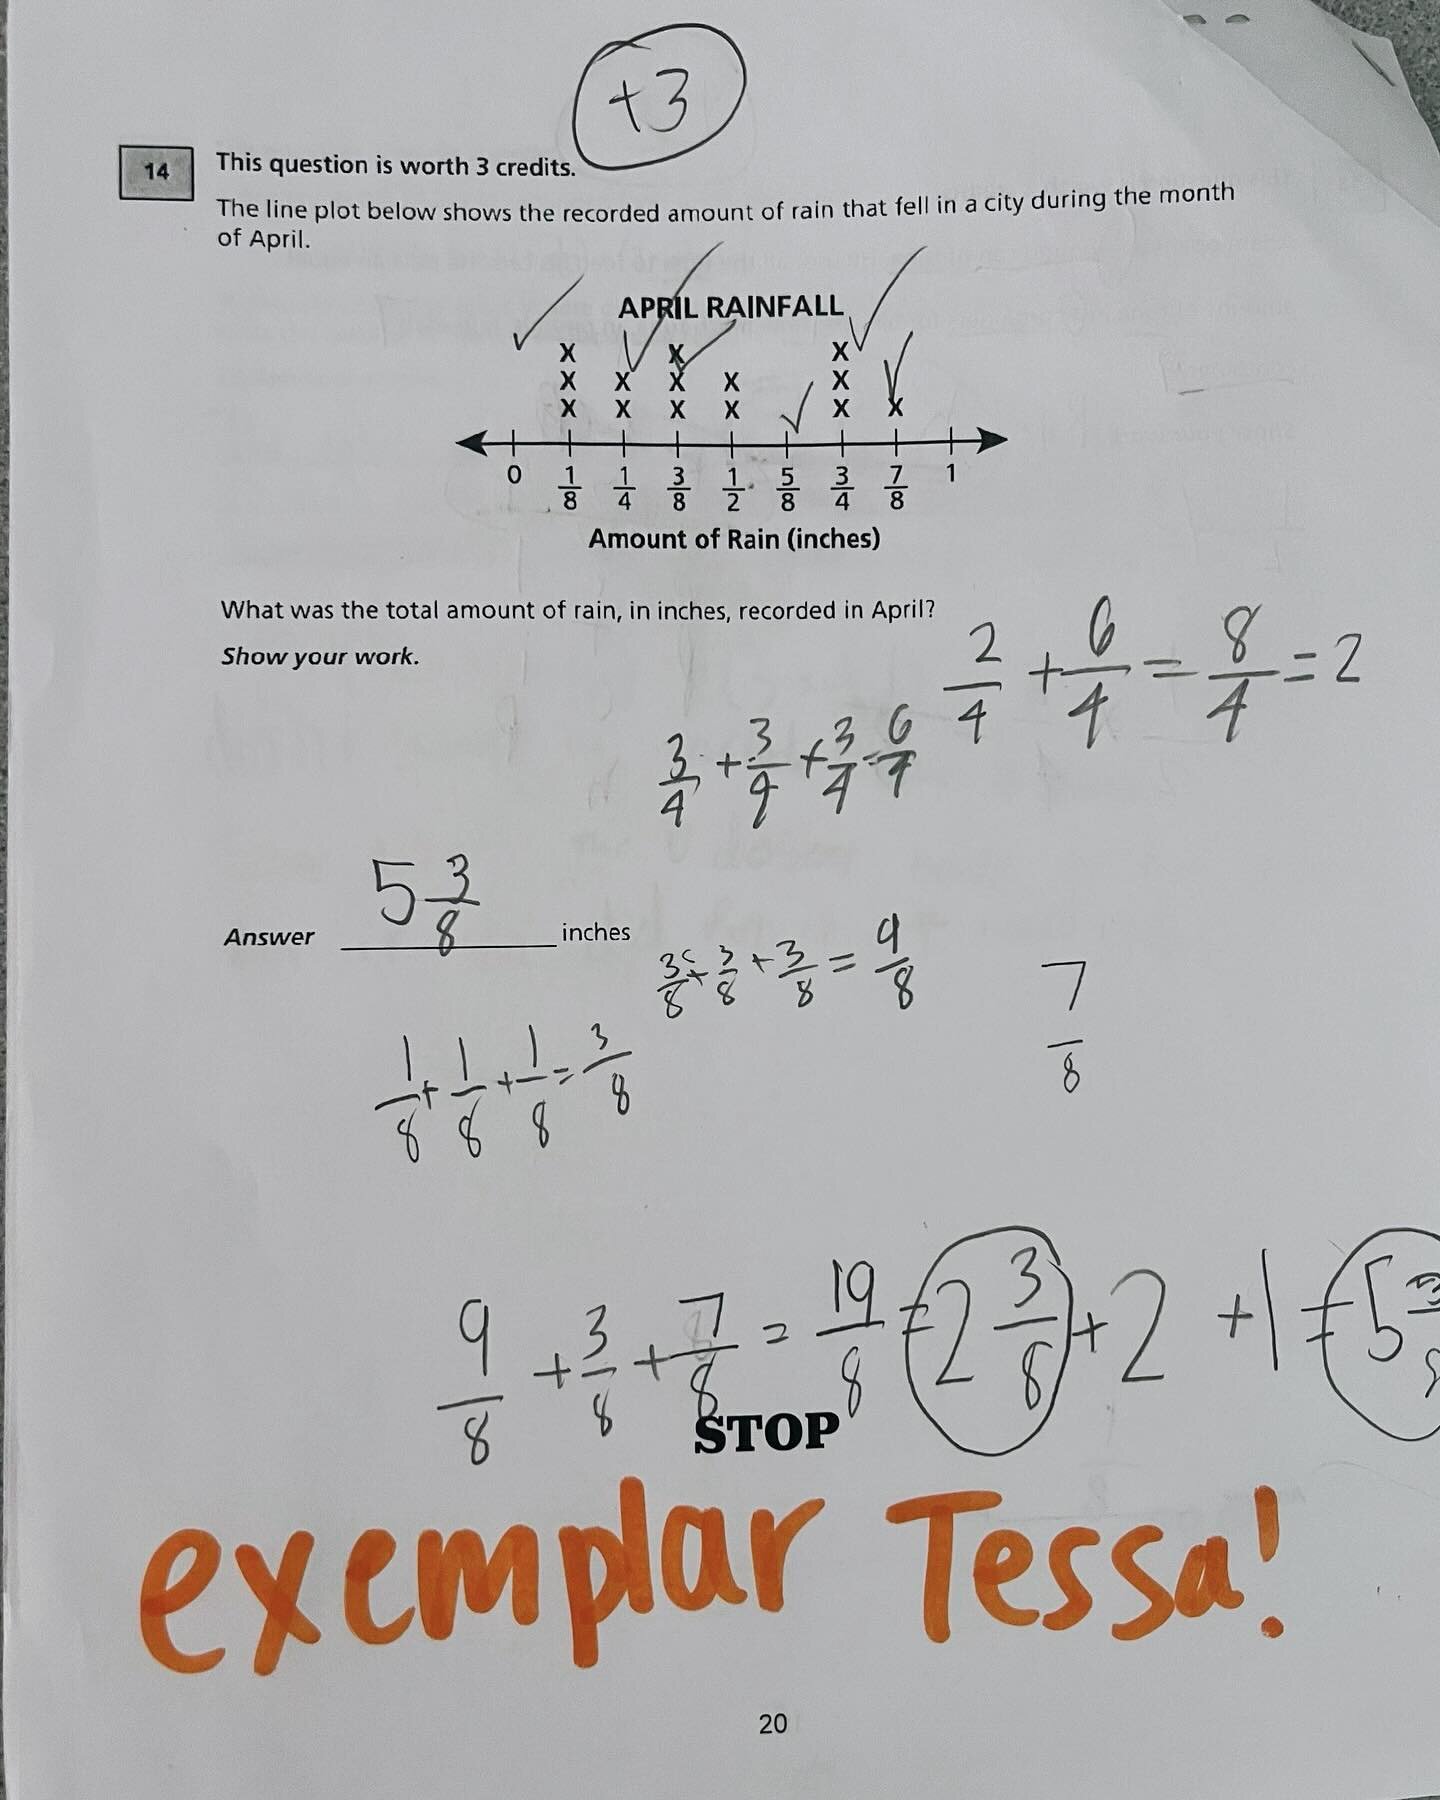 This #MondayMotivation goes out to our amazing 4th and 5th Grade mathematicians and their exemplar work 🤩
.
Students have been working hard all year learning math concepts and supporting their answers by showing their work and providing explanations